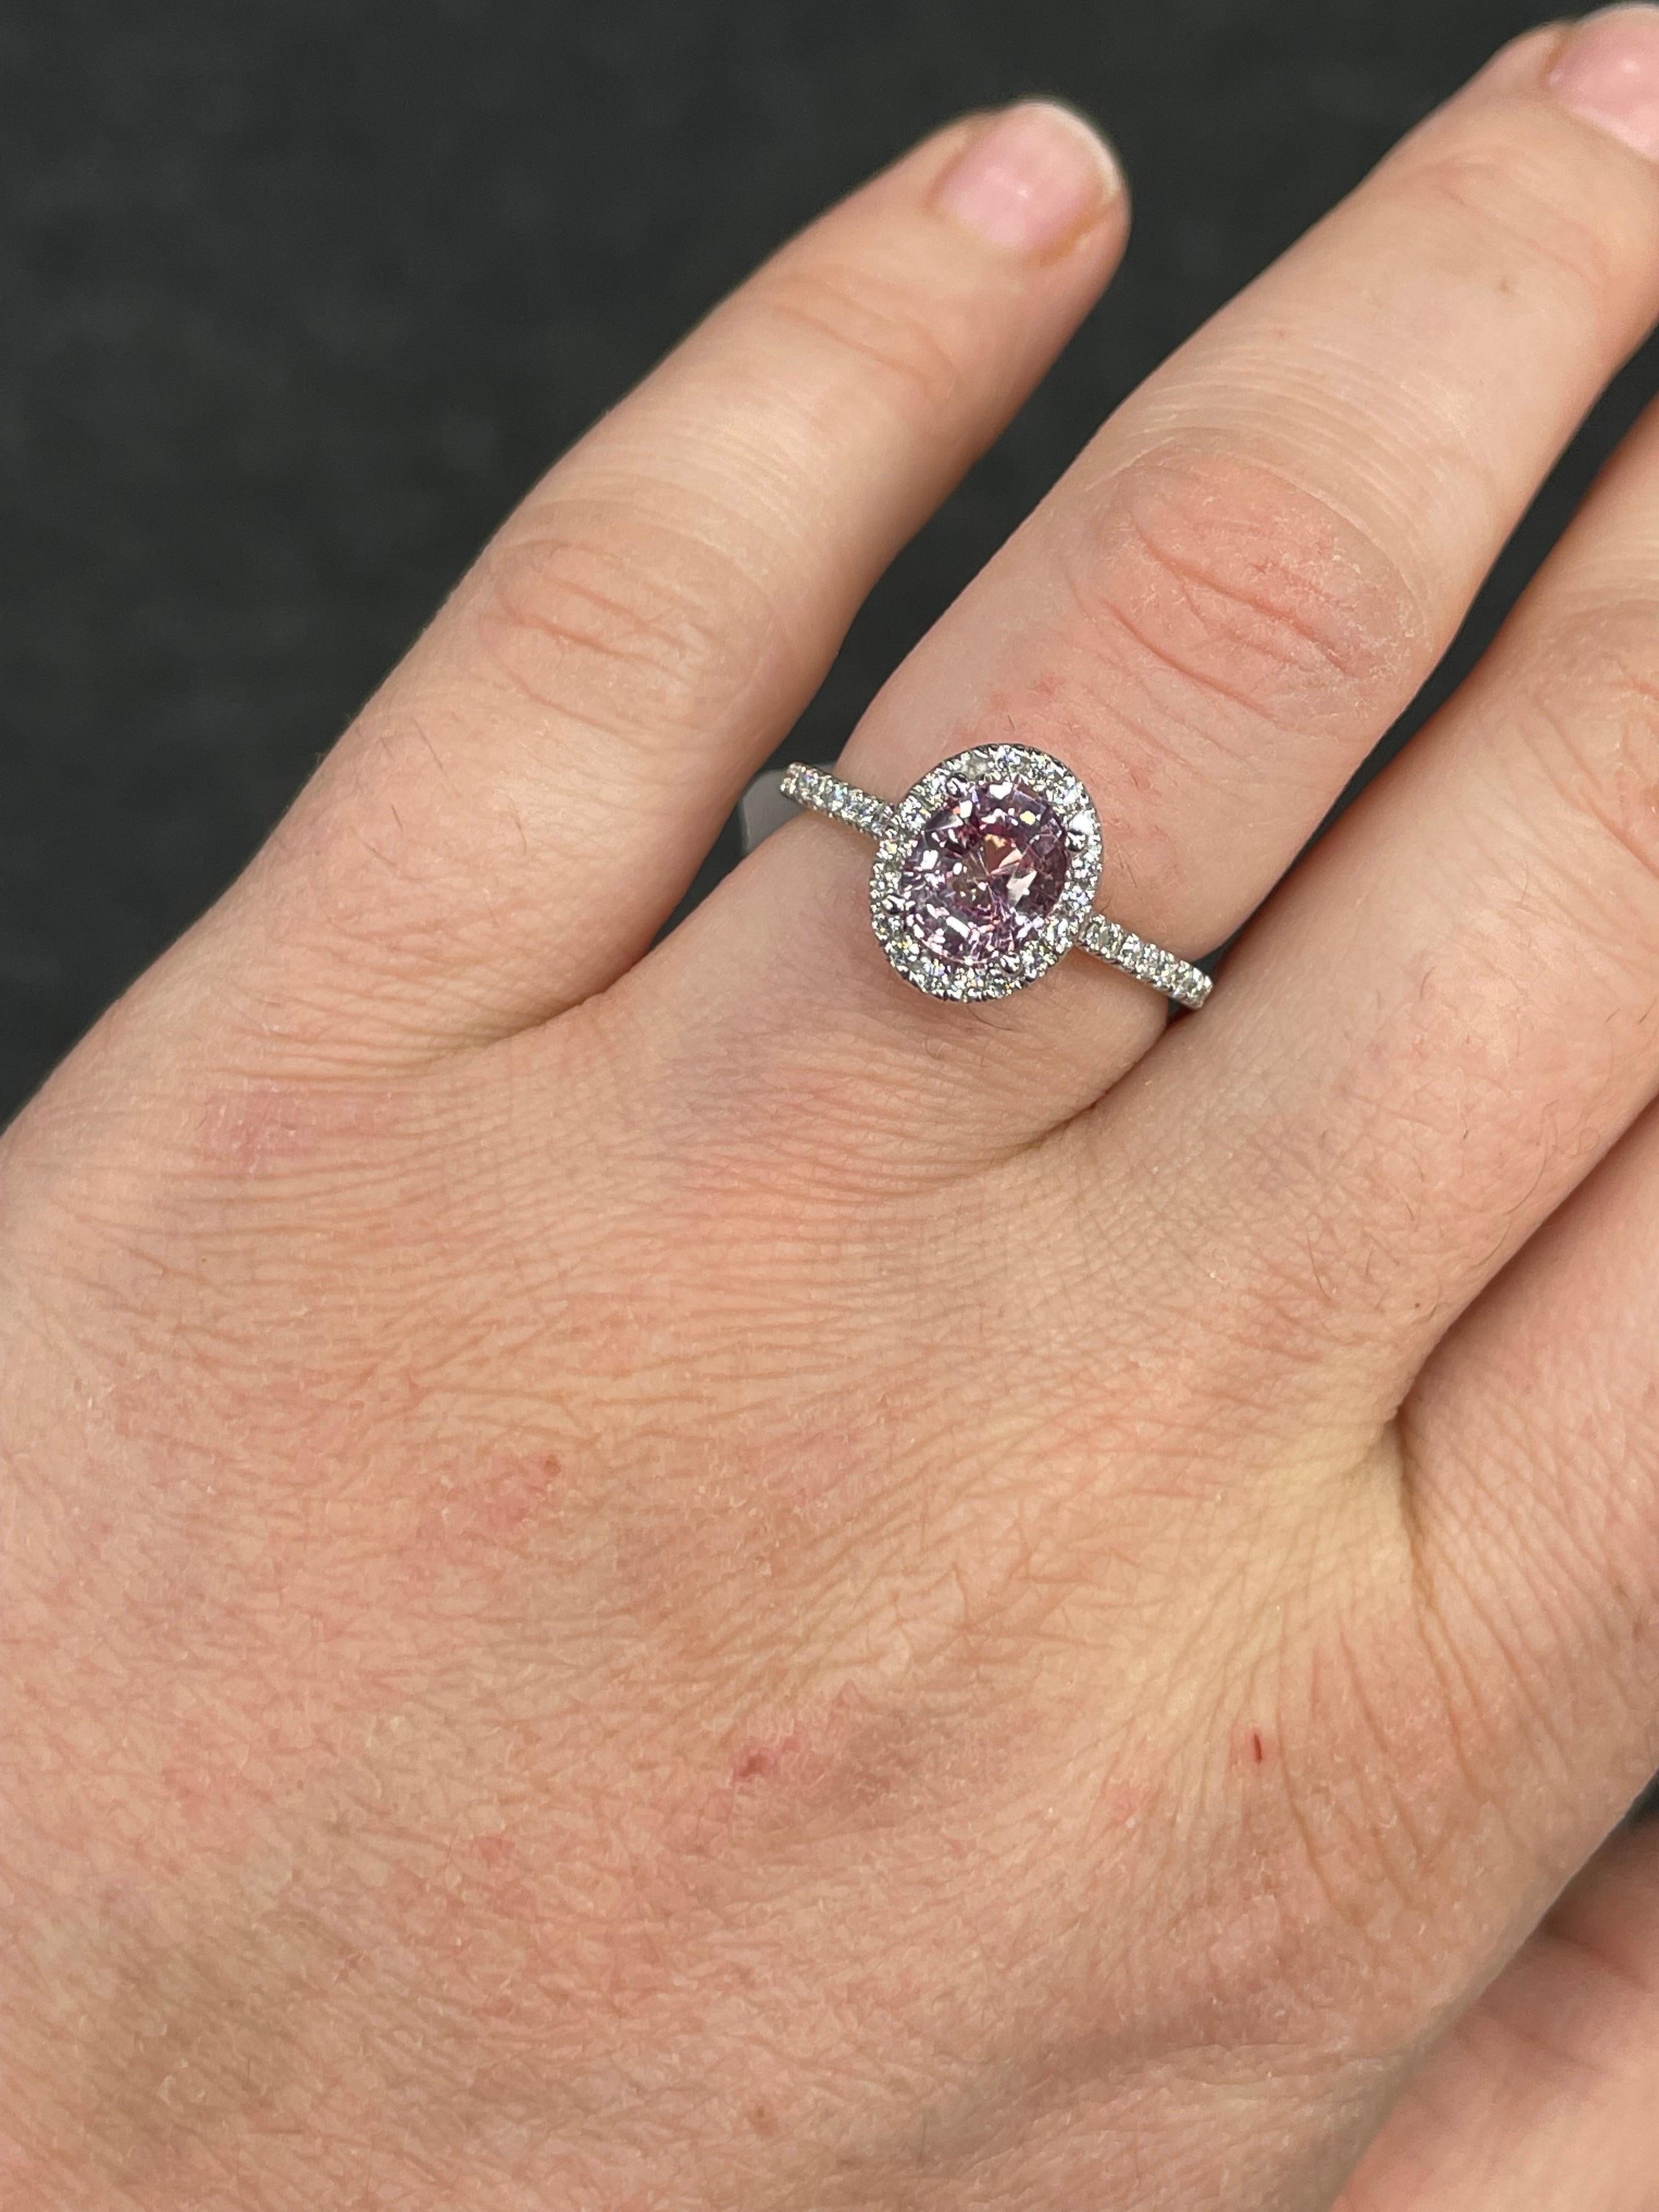 Certified Pink Sapphire No Heat Diamond Halo Ring 2.34 Carats 18k White Gold For Sale 4